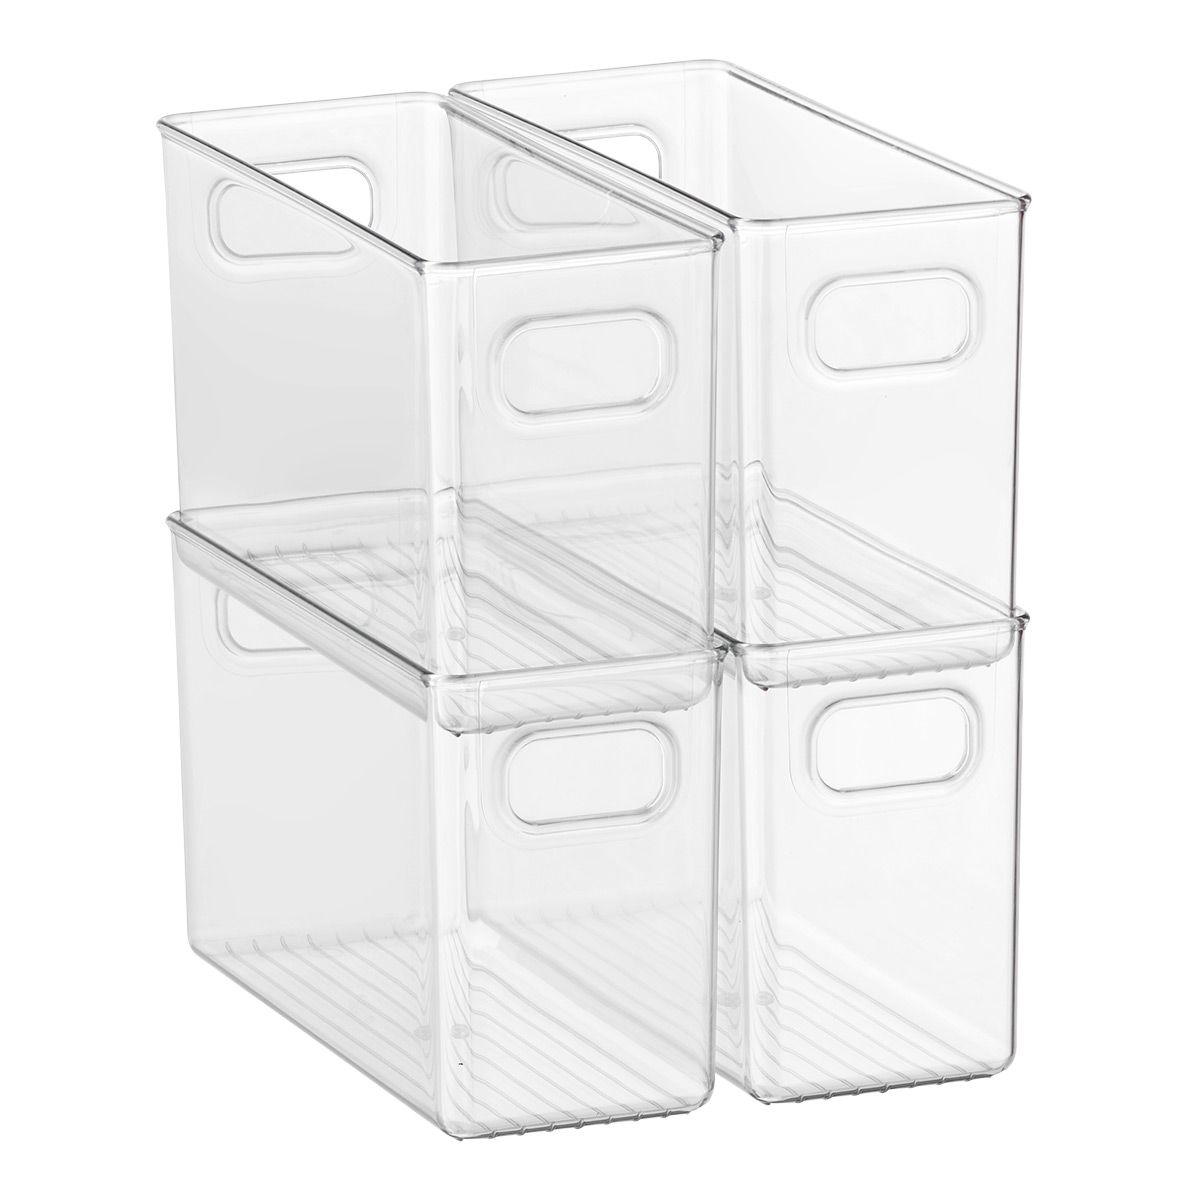 Case of 4 Linus Narrow Pantry Bin Clear | The Container Store